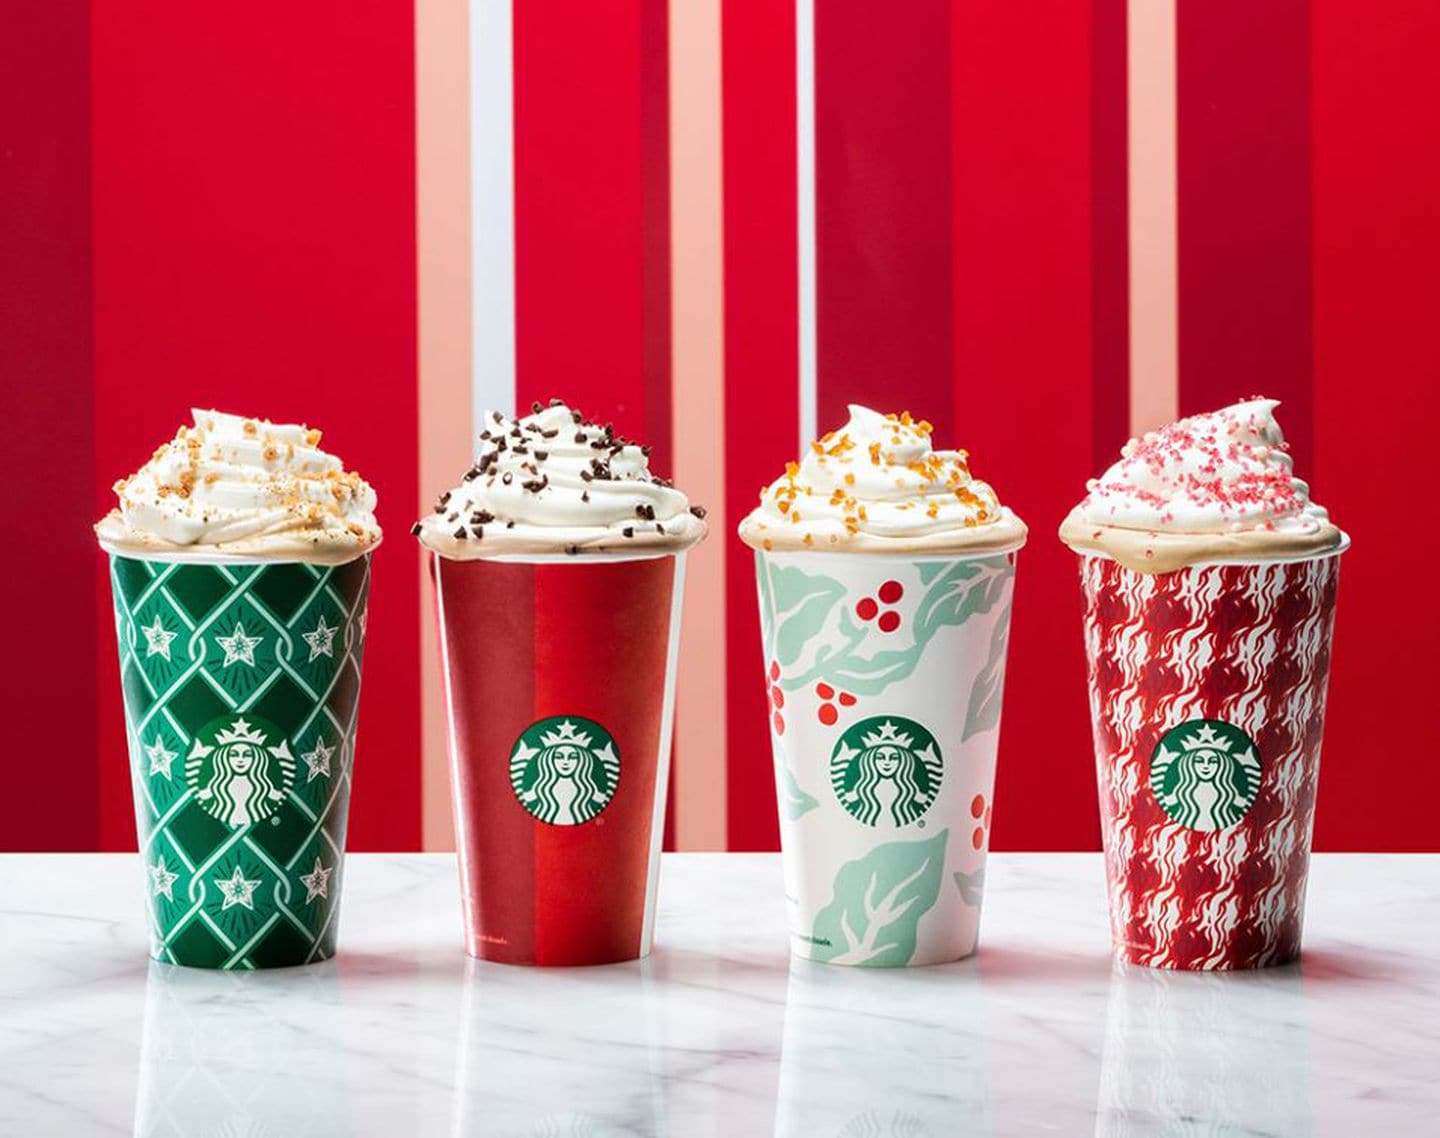 Starbucks Christmas cups: Do the new designs embrace